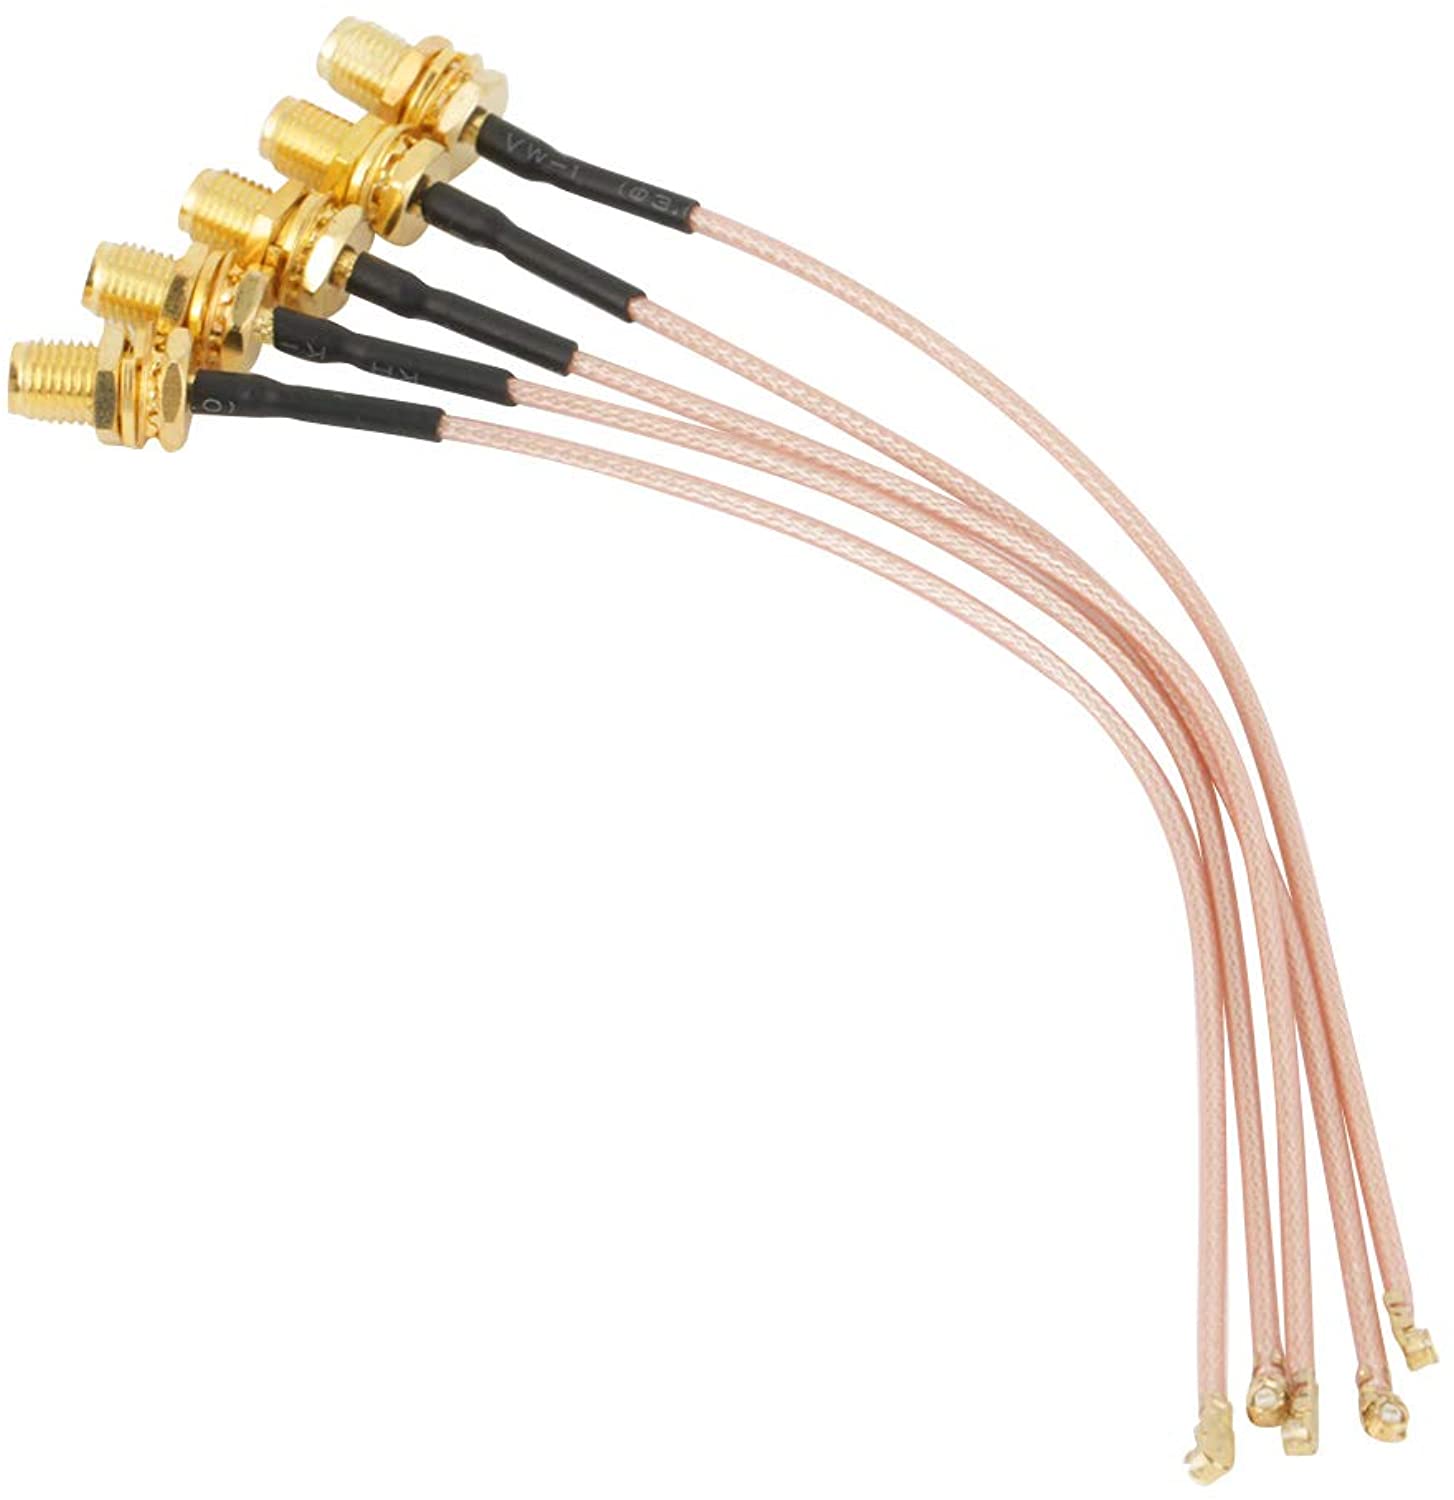 for Phone Antenna Router Antenna SMA Female to IPEX Cable Standardized Design Fold-Resistant Coax Cable 